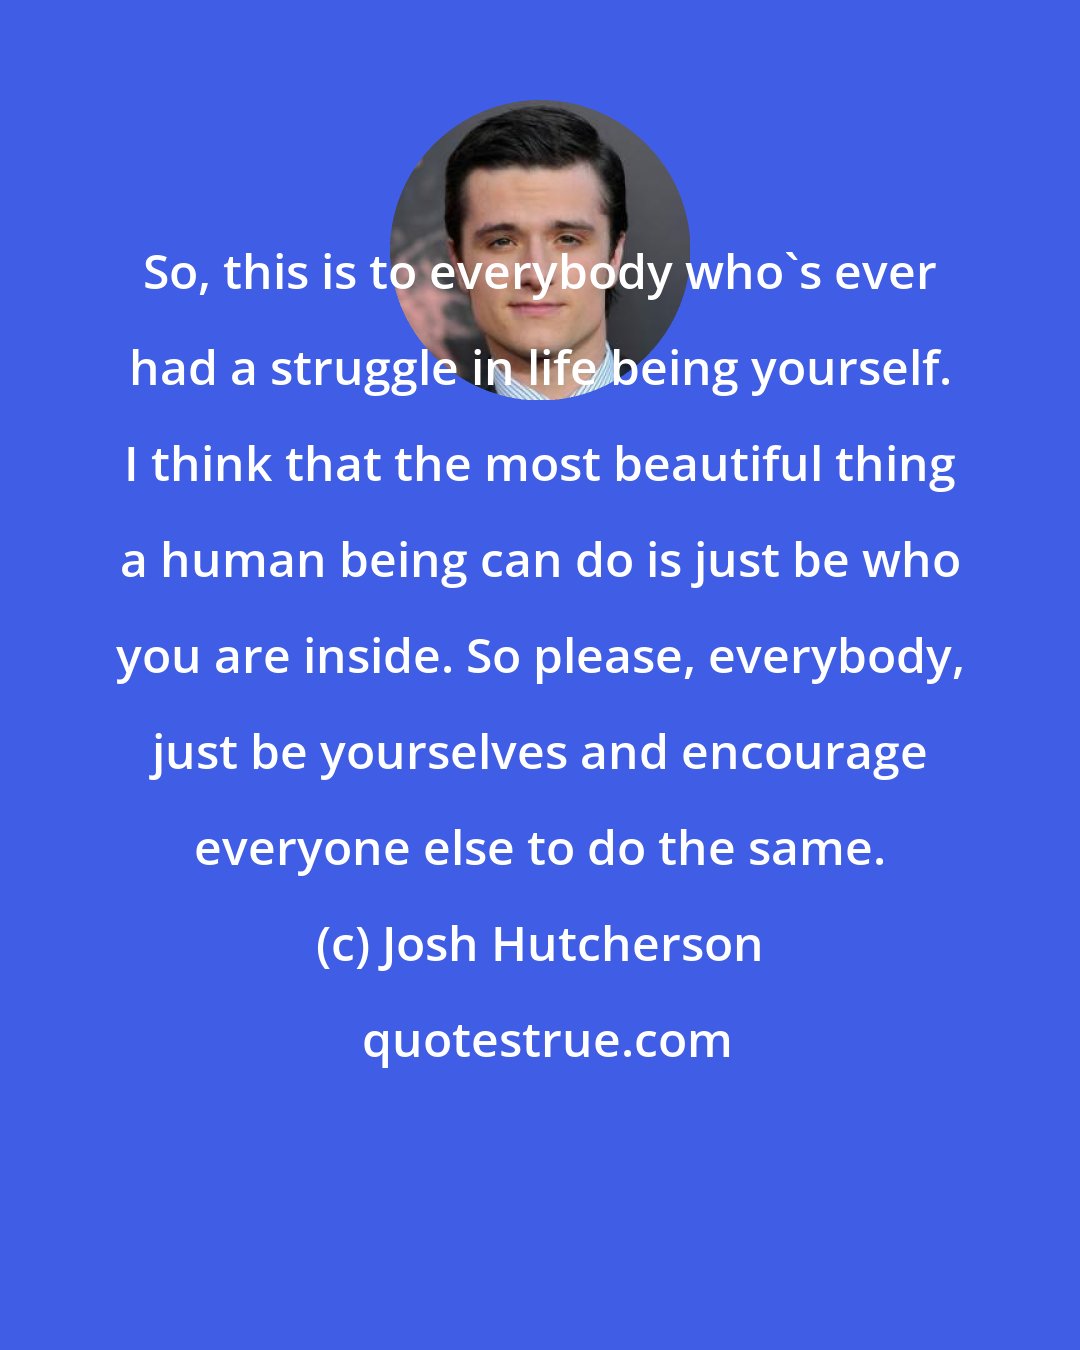 Josh Hutcherson: So, this is to everybody who's ever had a struggle in life being yourself. I think that the most beautiful thing a human being can do is just be who you are inside. So please, everybody, just be yourselves and encourage everyone else to do the same.